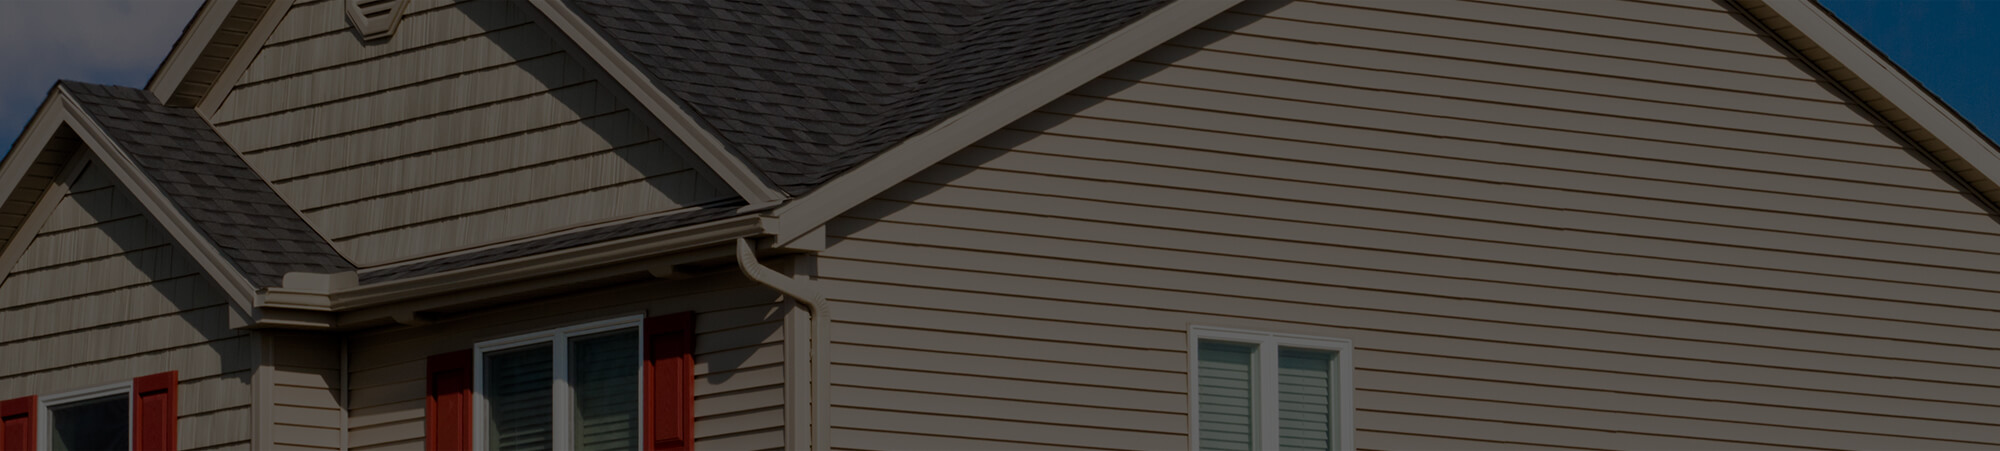 siding installation and replacement services in Howard wi